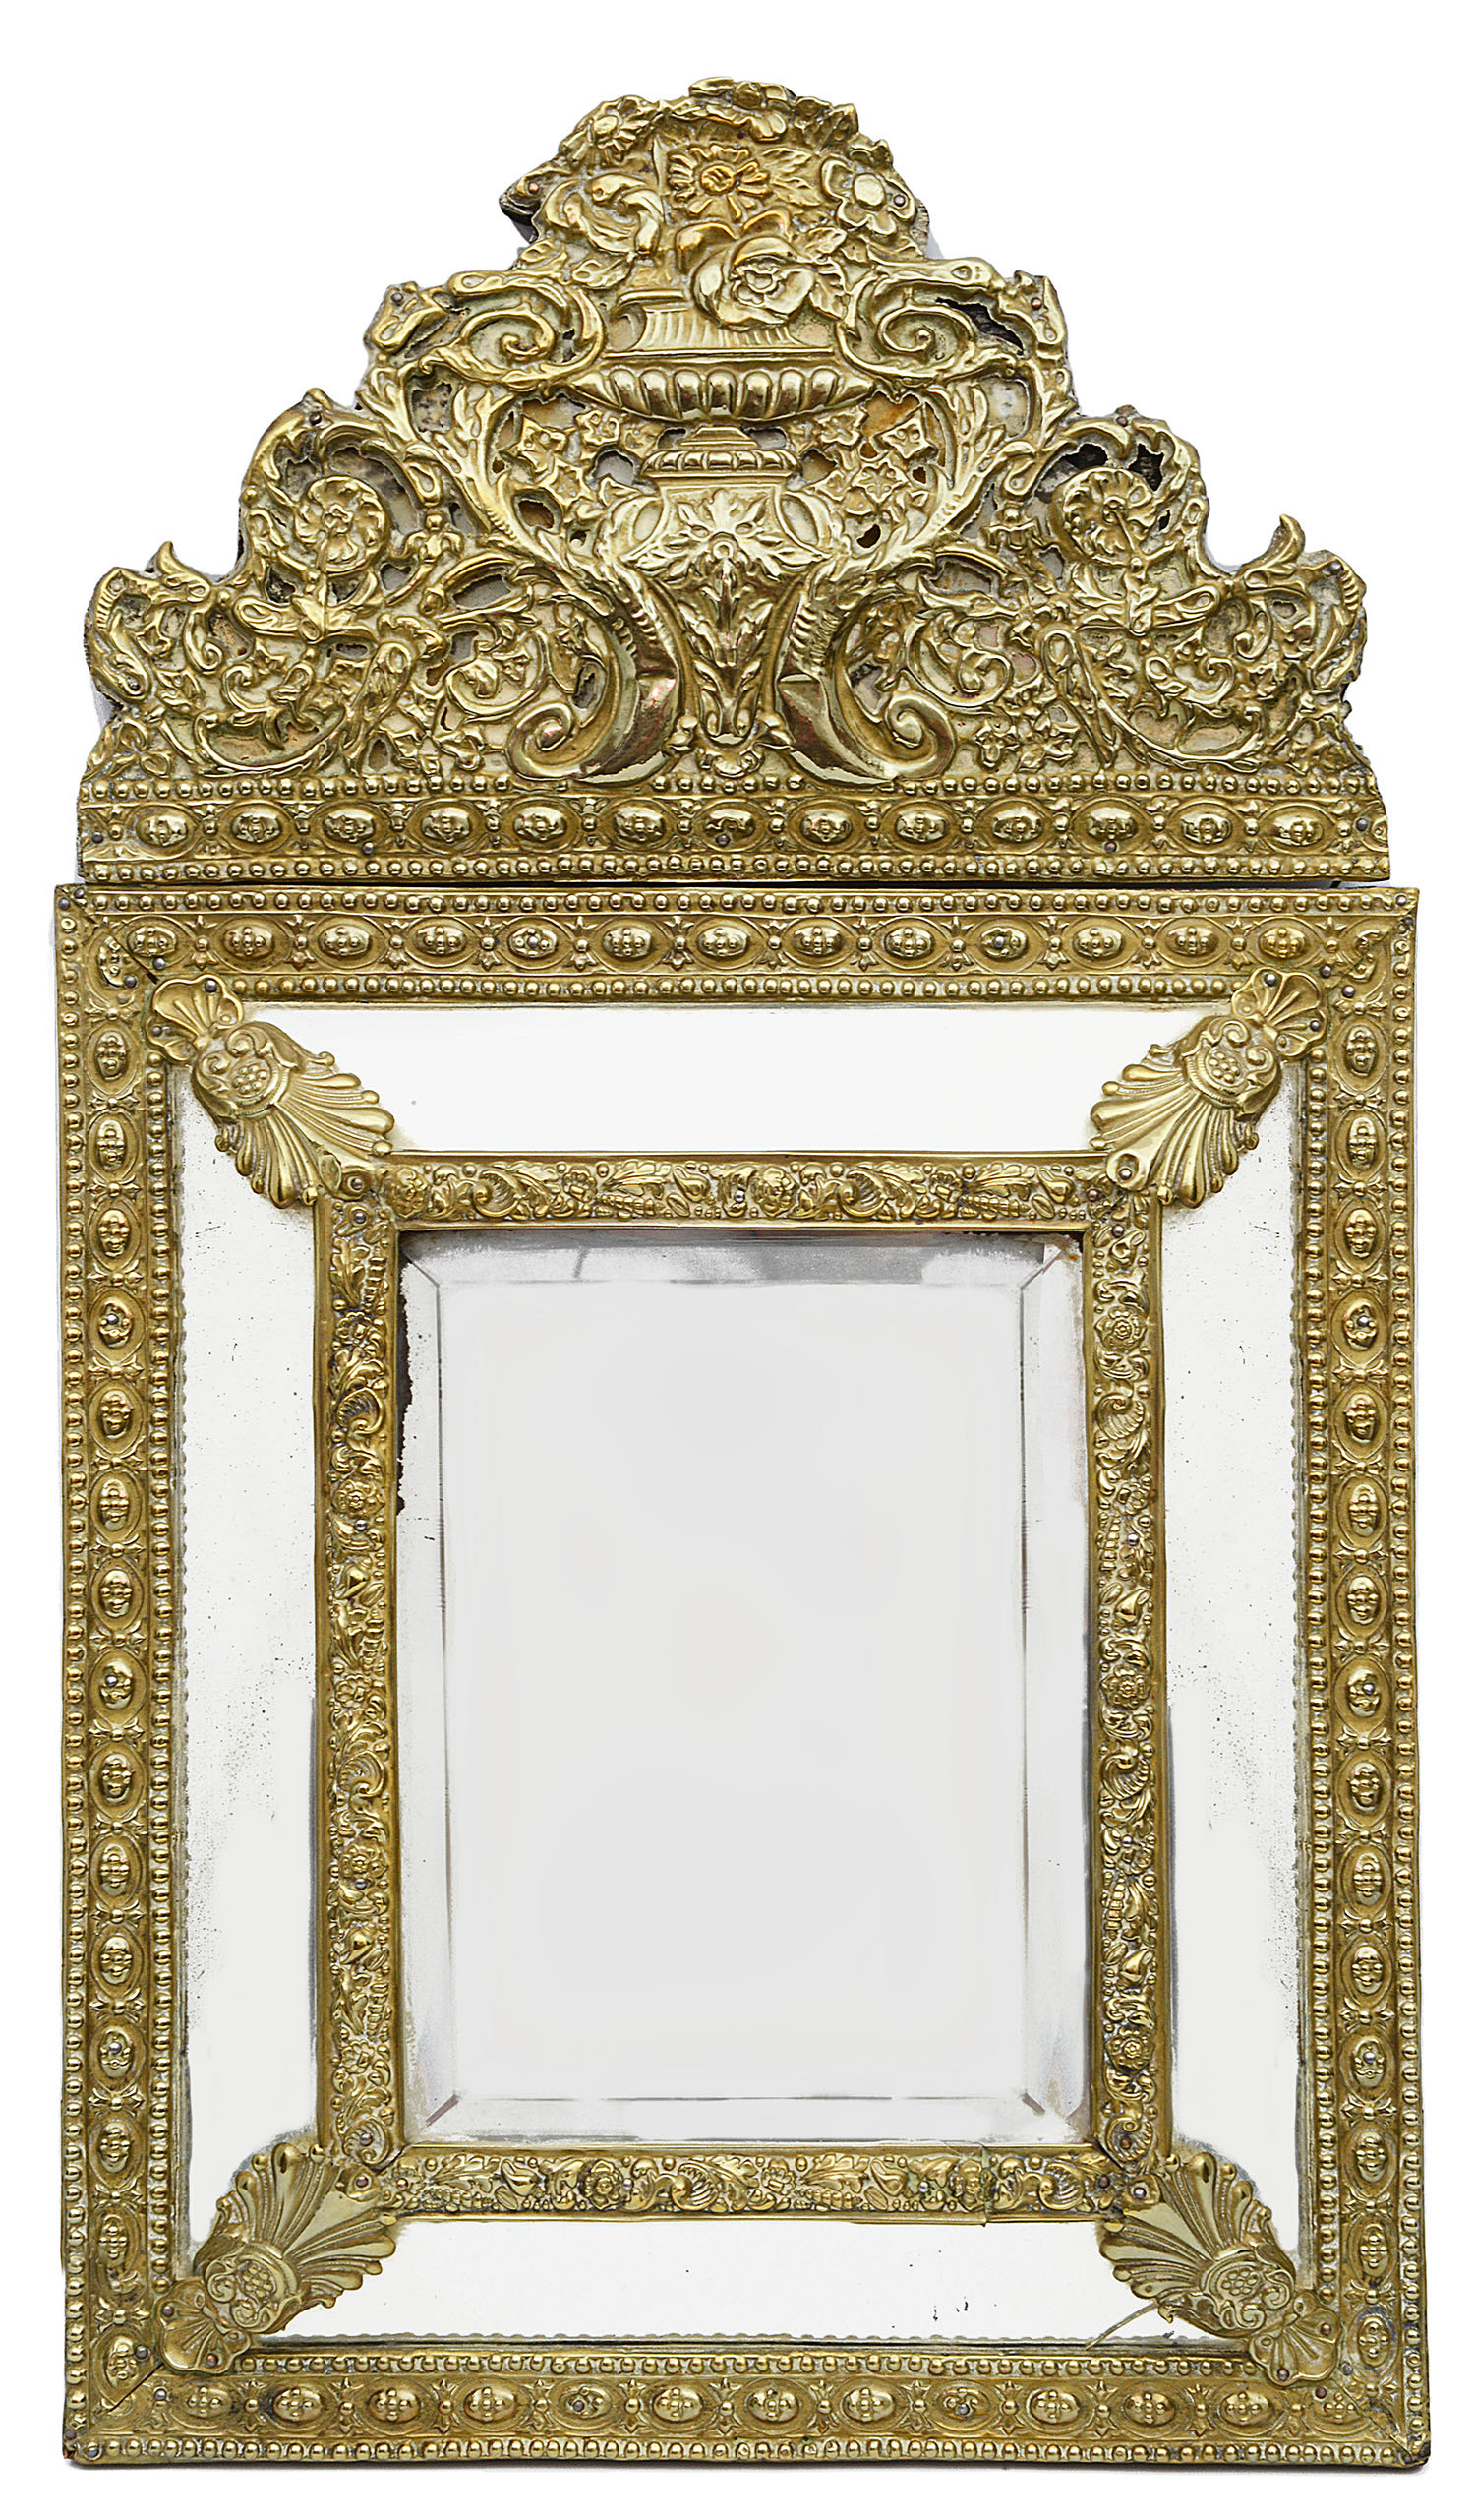 A 19th century Flemish embossed brass cushion wall mirror in 17th century style